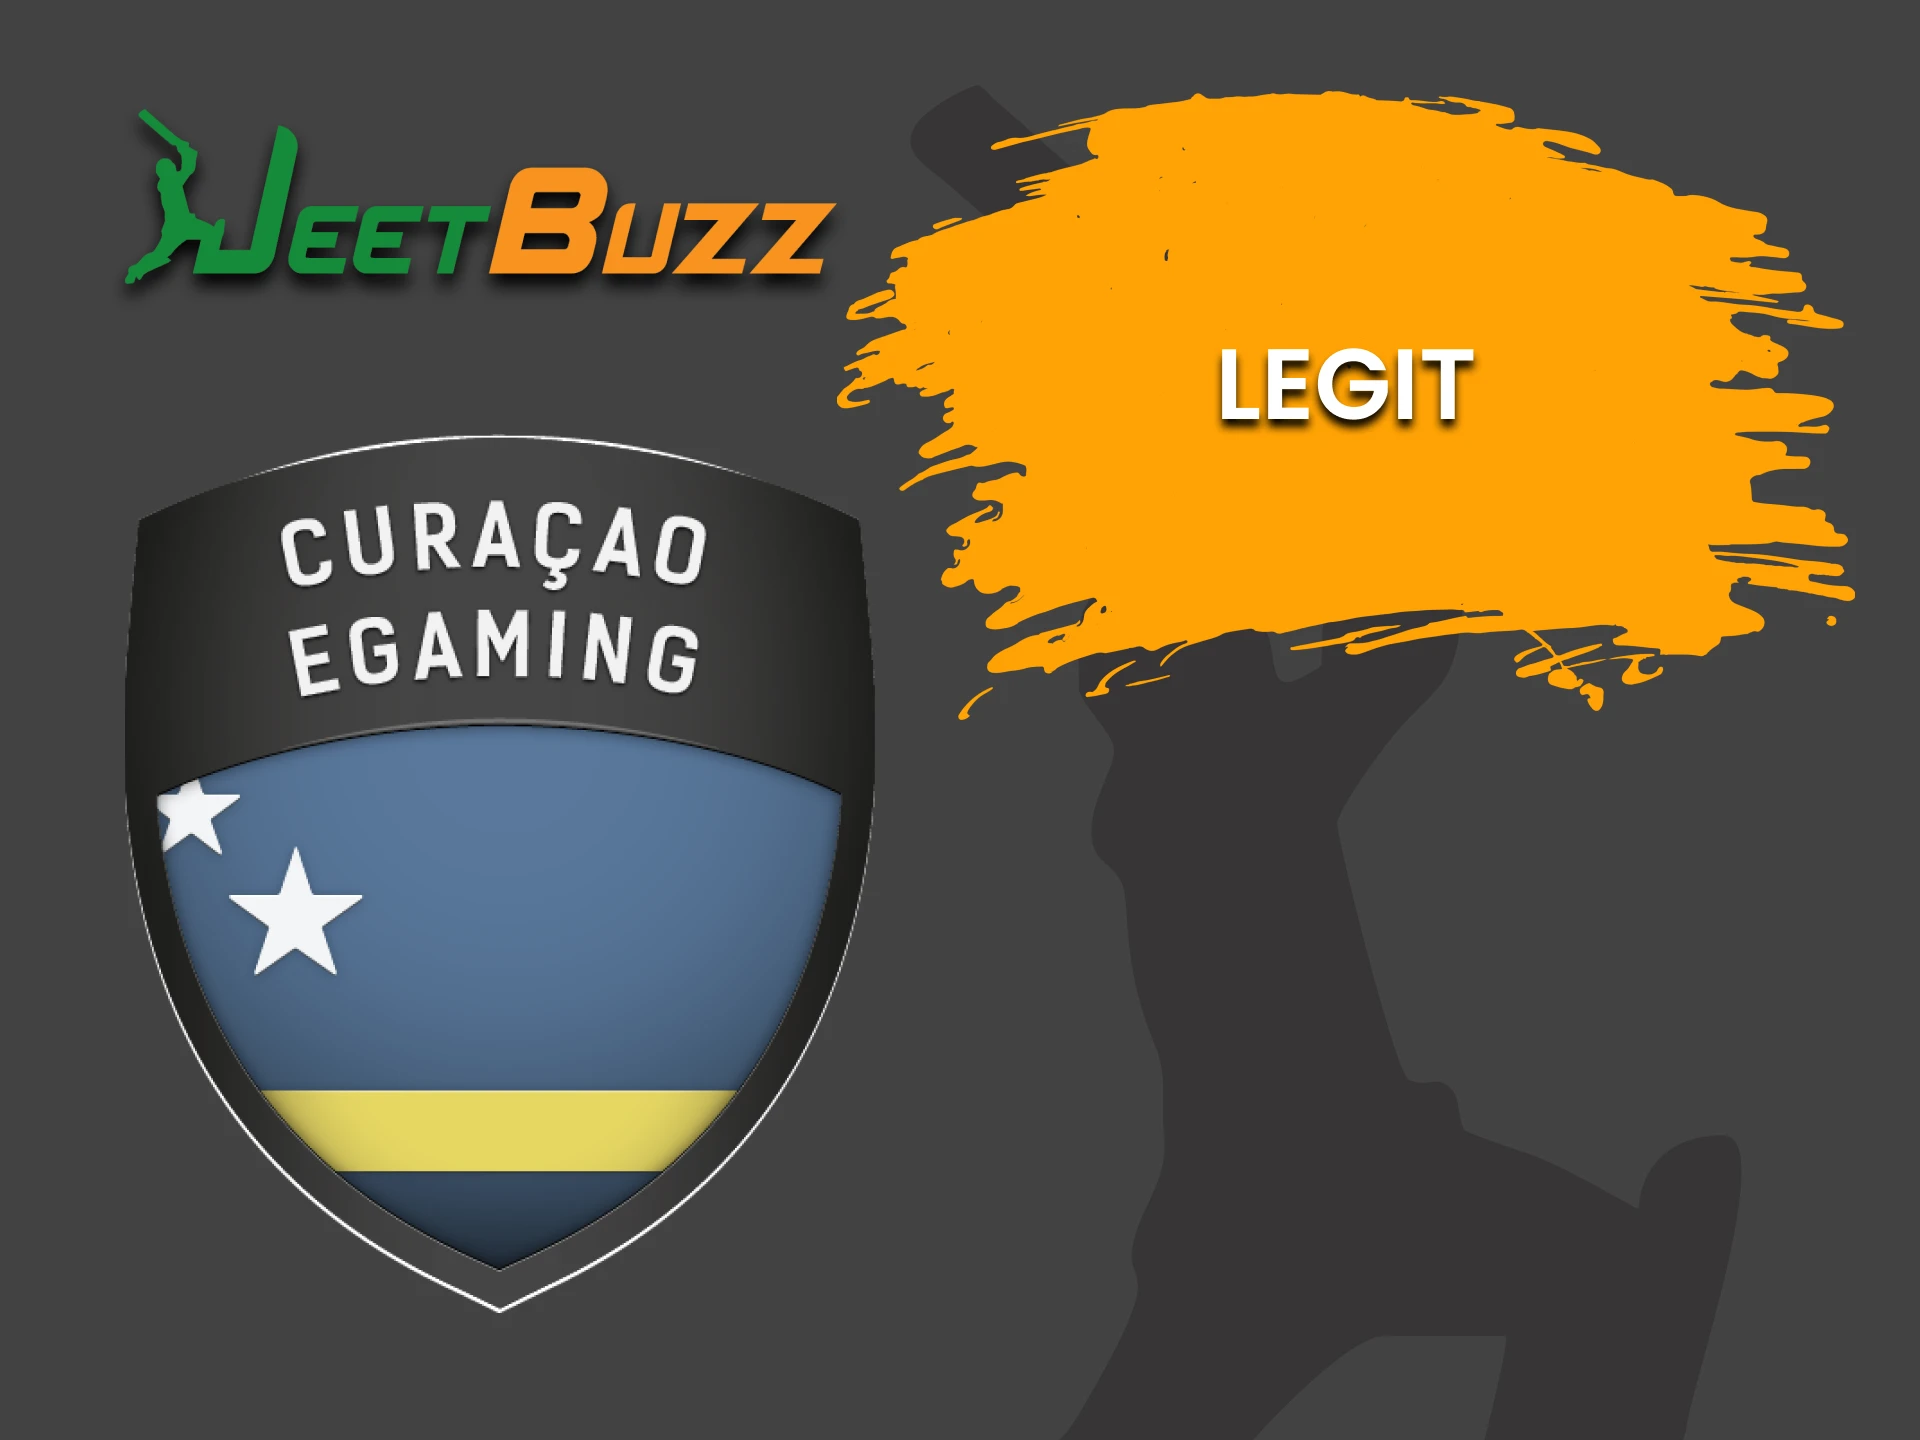 Betting on esports from JeetBuzz is absolutely legal.